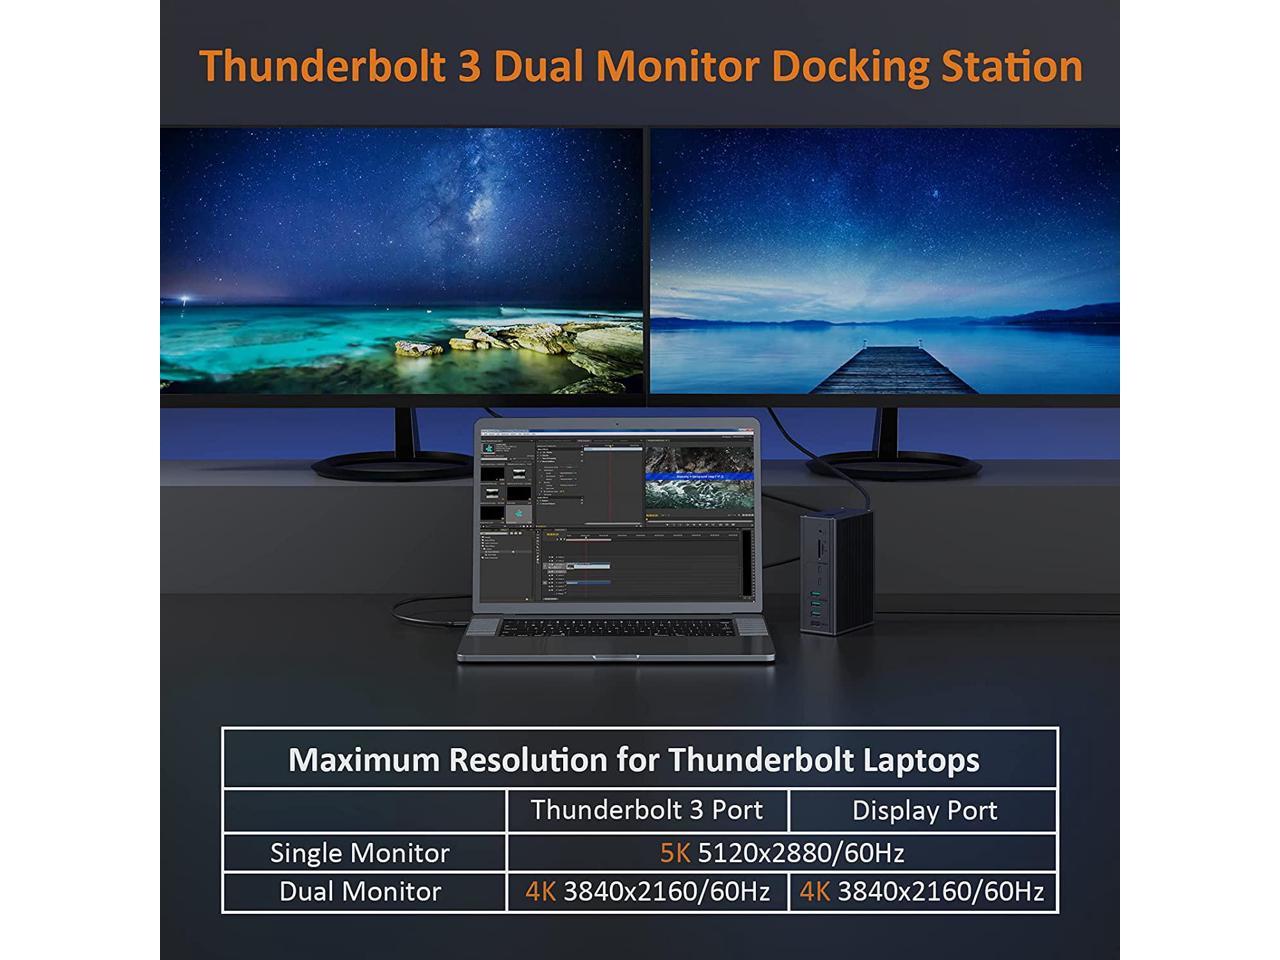 Thunderbolt 3 Dock for Display,UHS-II SD Card Slot,USB-C/ USB3.1 Tobenone Thunderbolt 3 Dual Monitor Docking Station for MacBook Pro/Air/Windows ,Compatible with Thunderbolt3/4 Laptop 10Gbps 